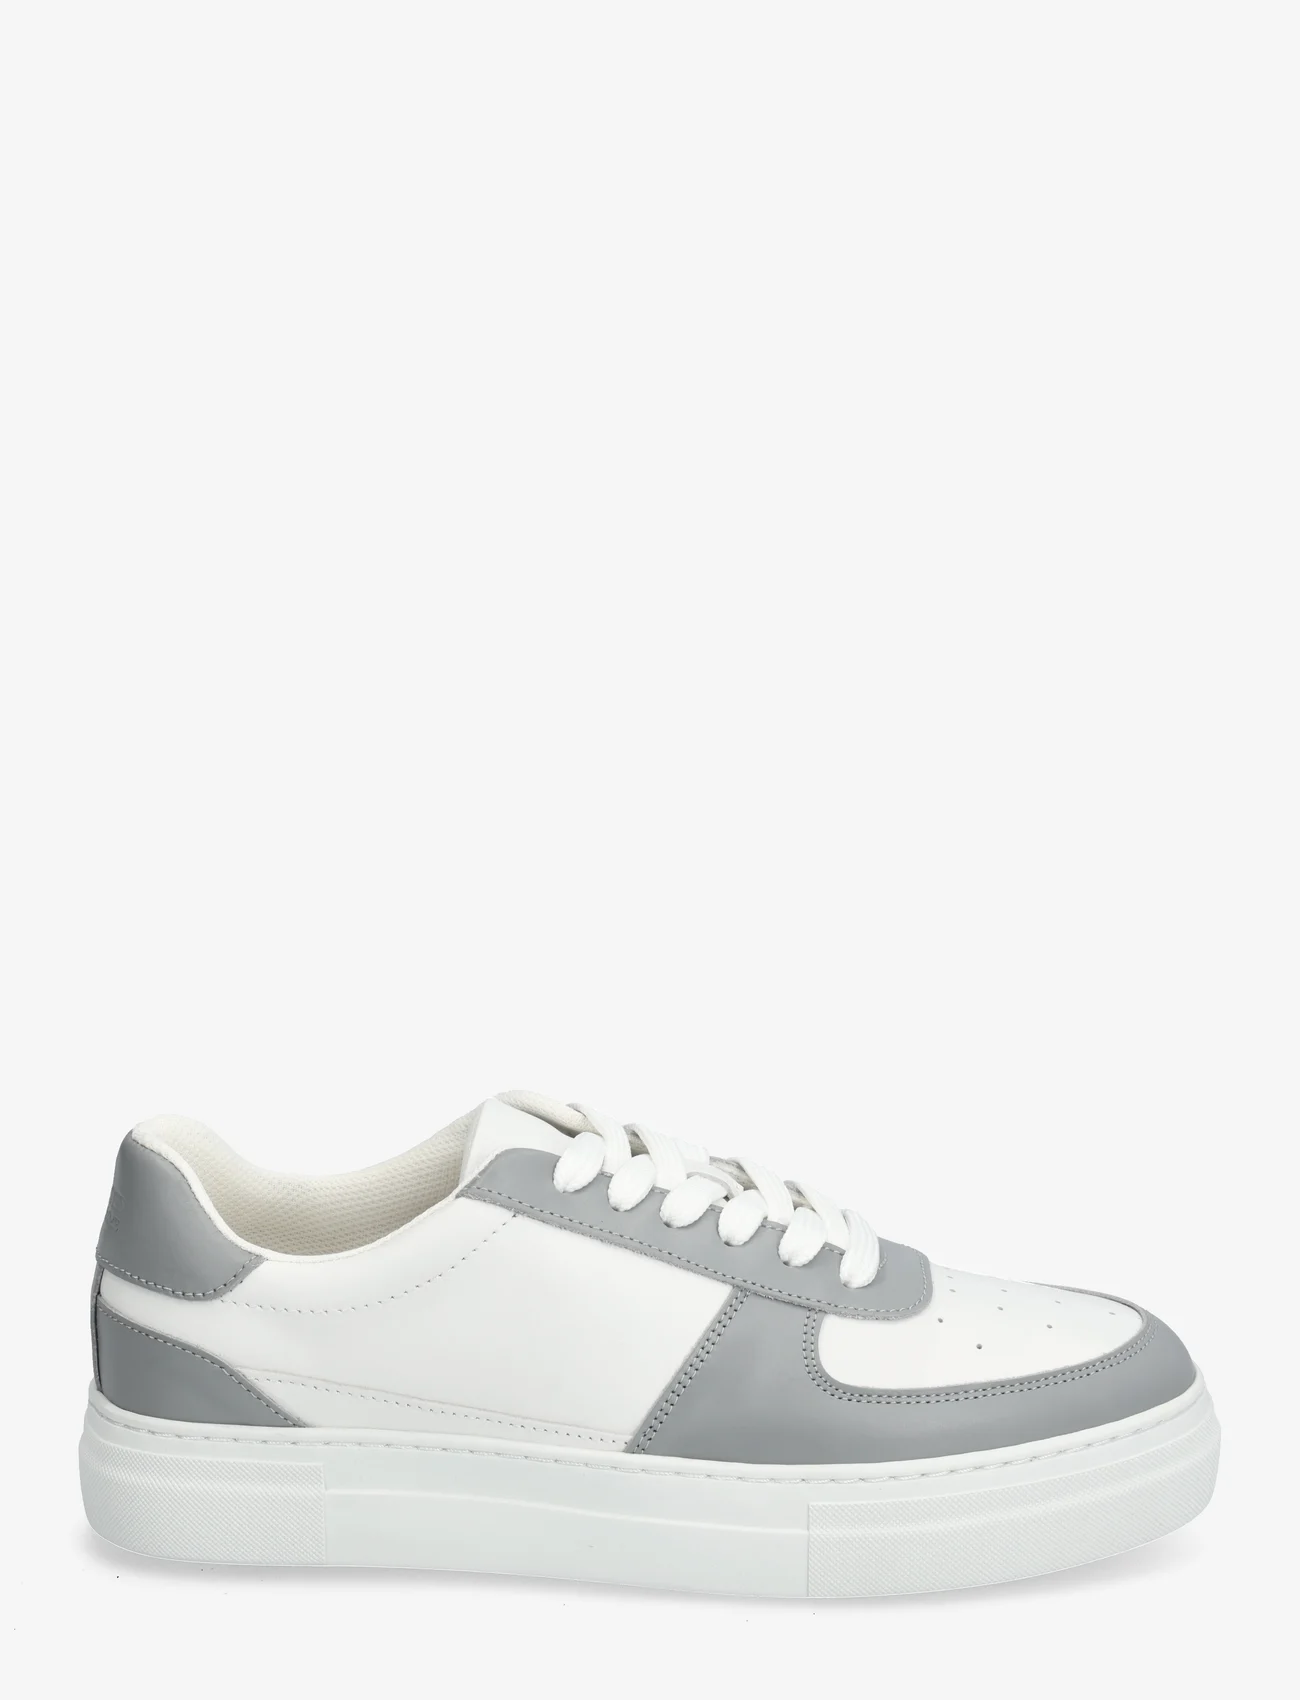 Selected Homme - SLHHARALD LEATHER SNEAKER - låga sneakers - grey - 1